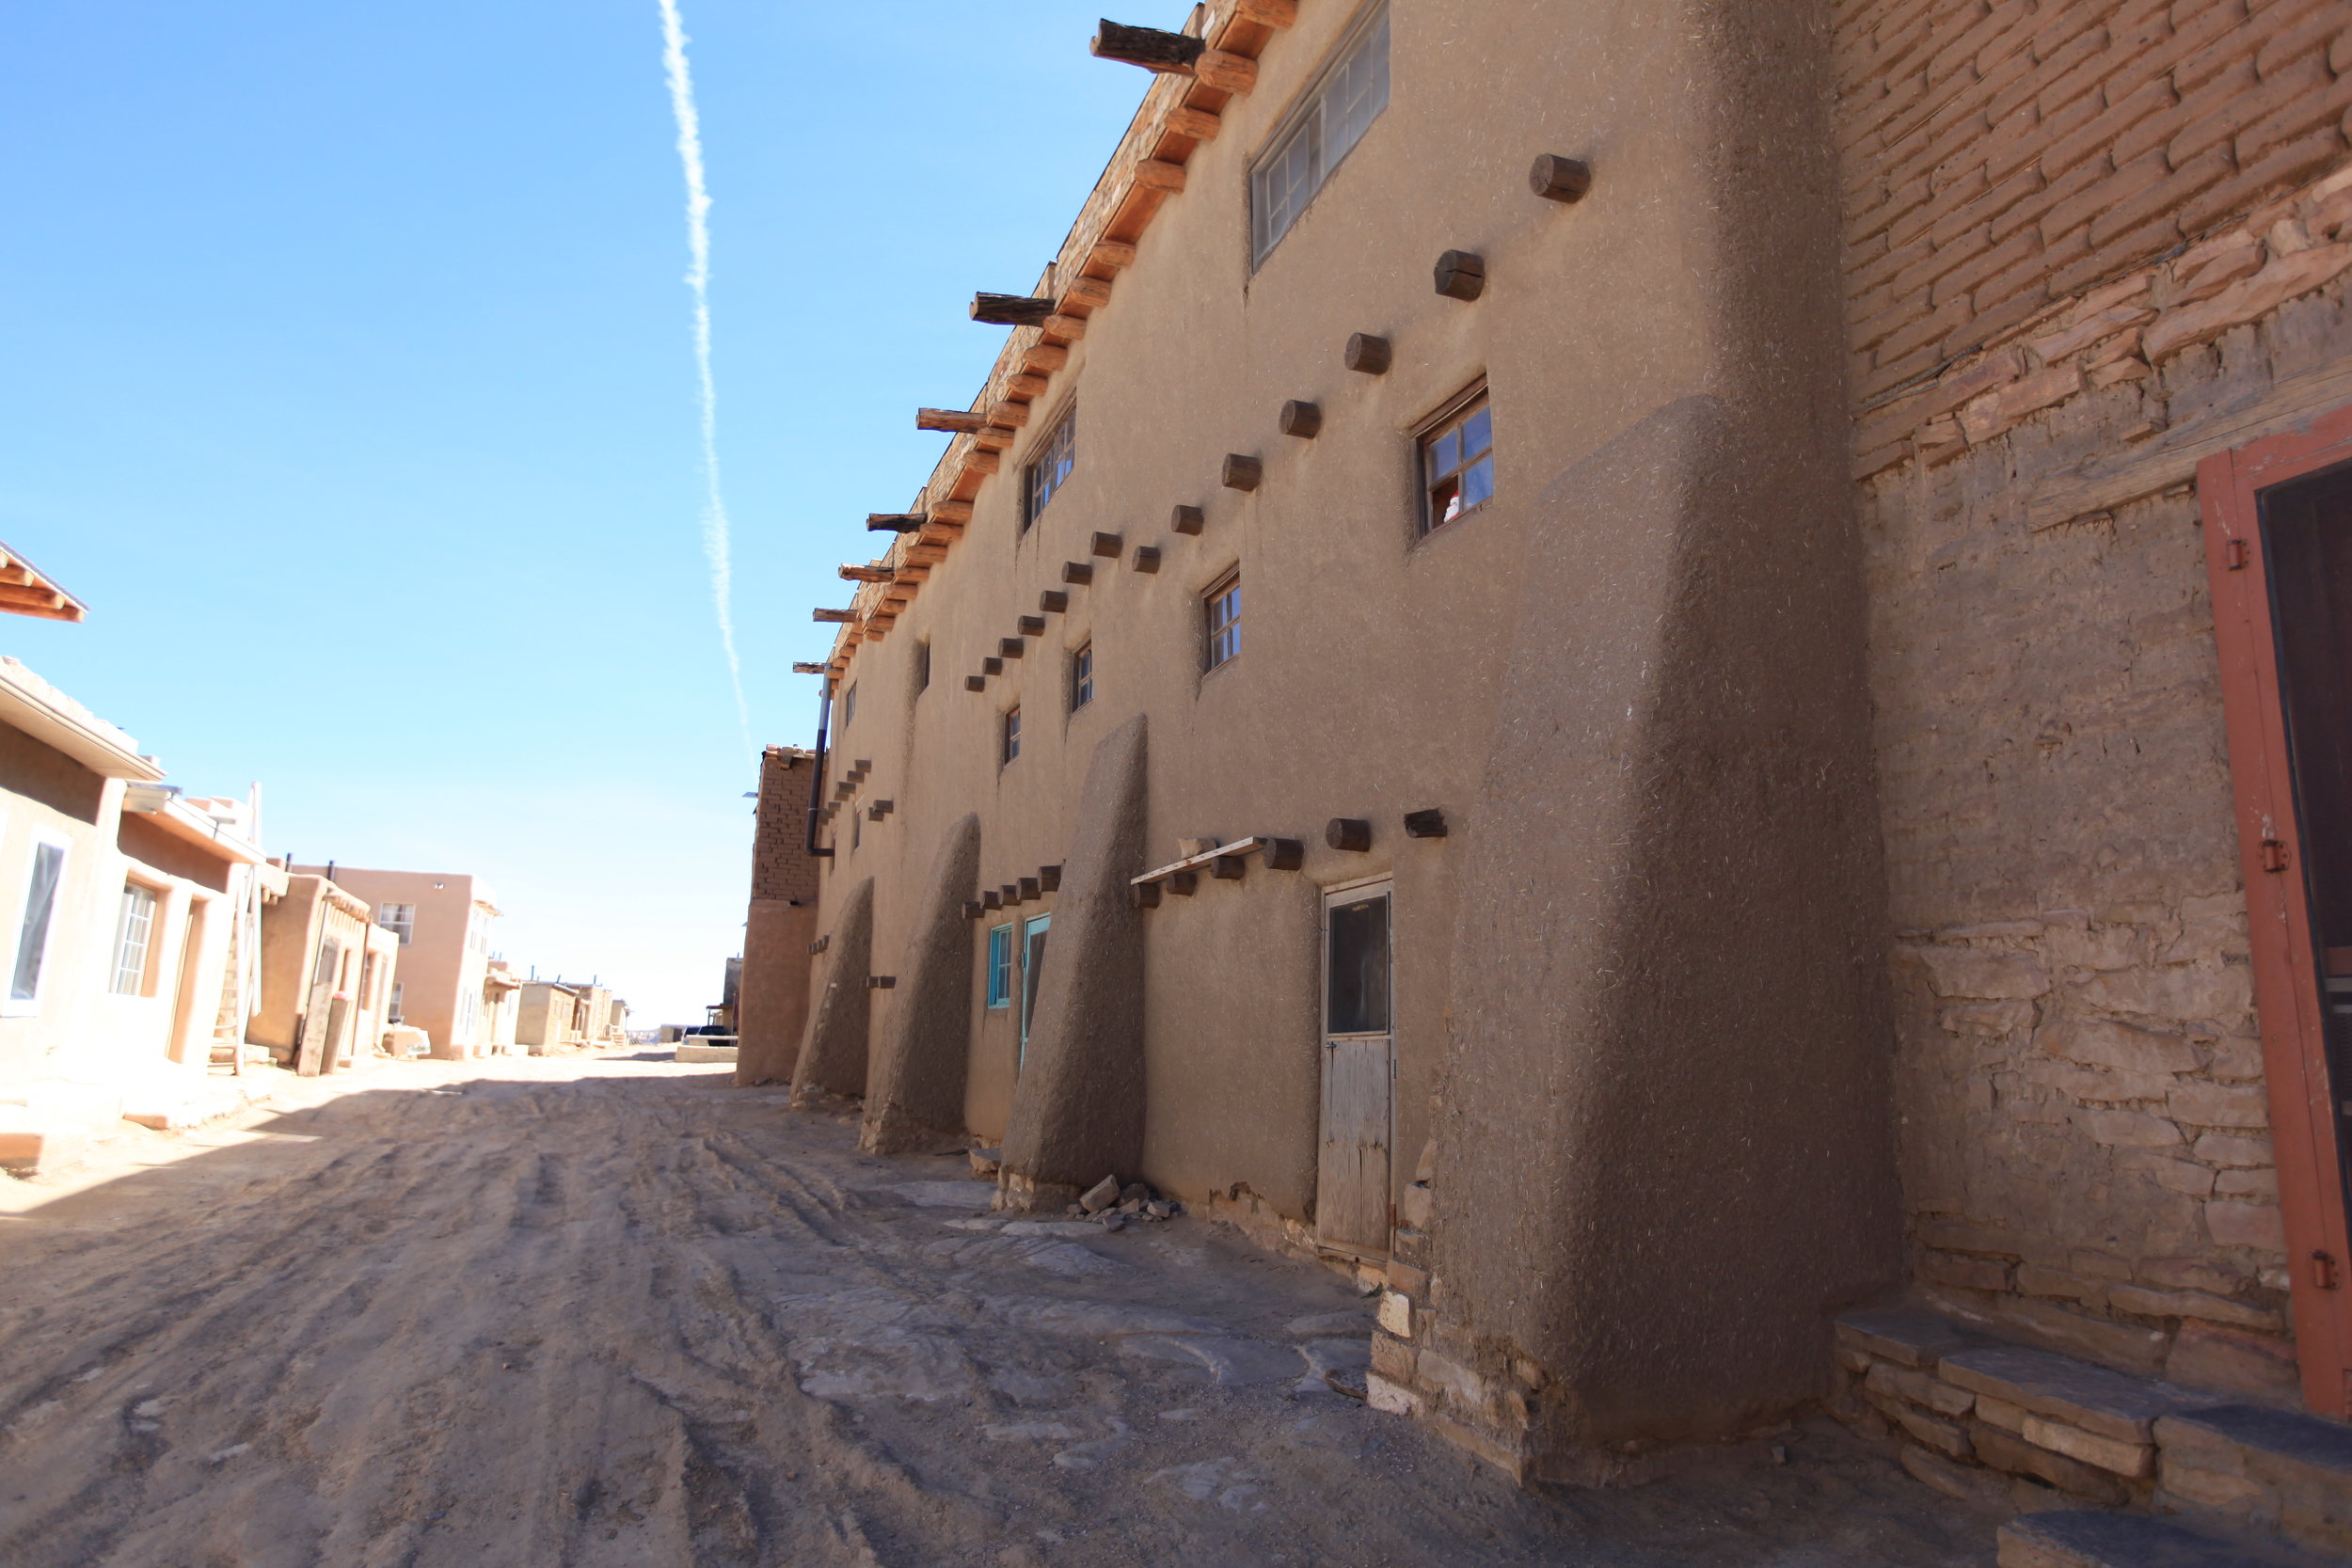  One of the oldest buildings in the Pueblo, dating from the 16th century. 